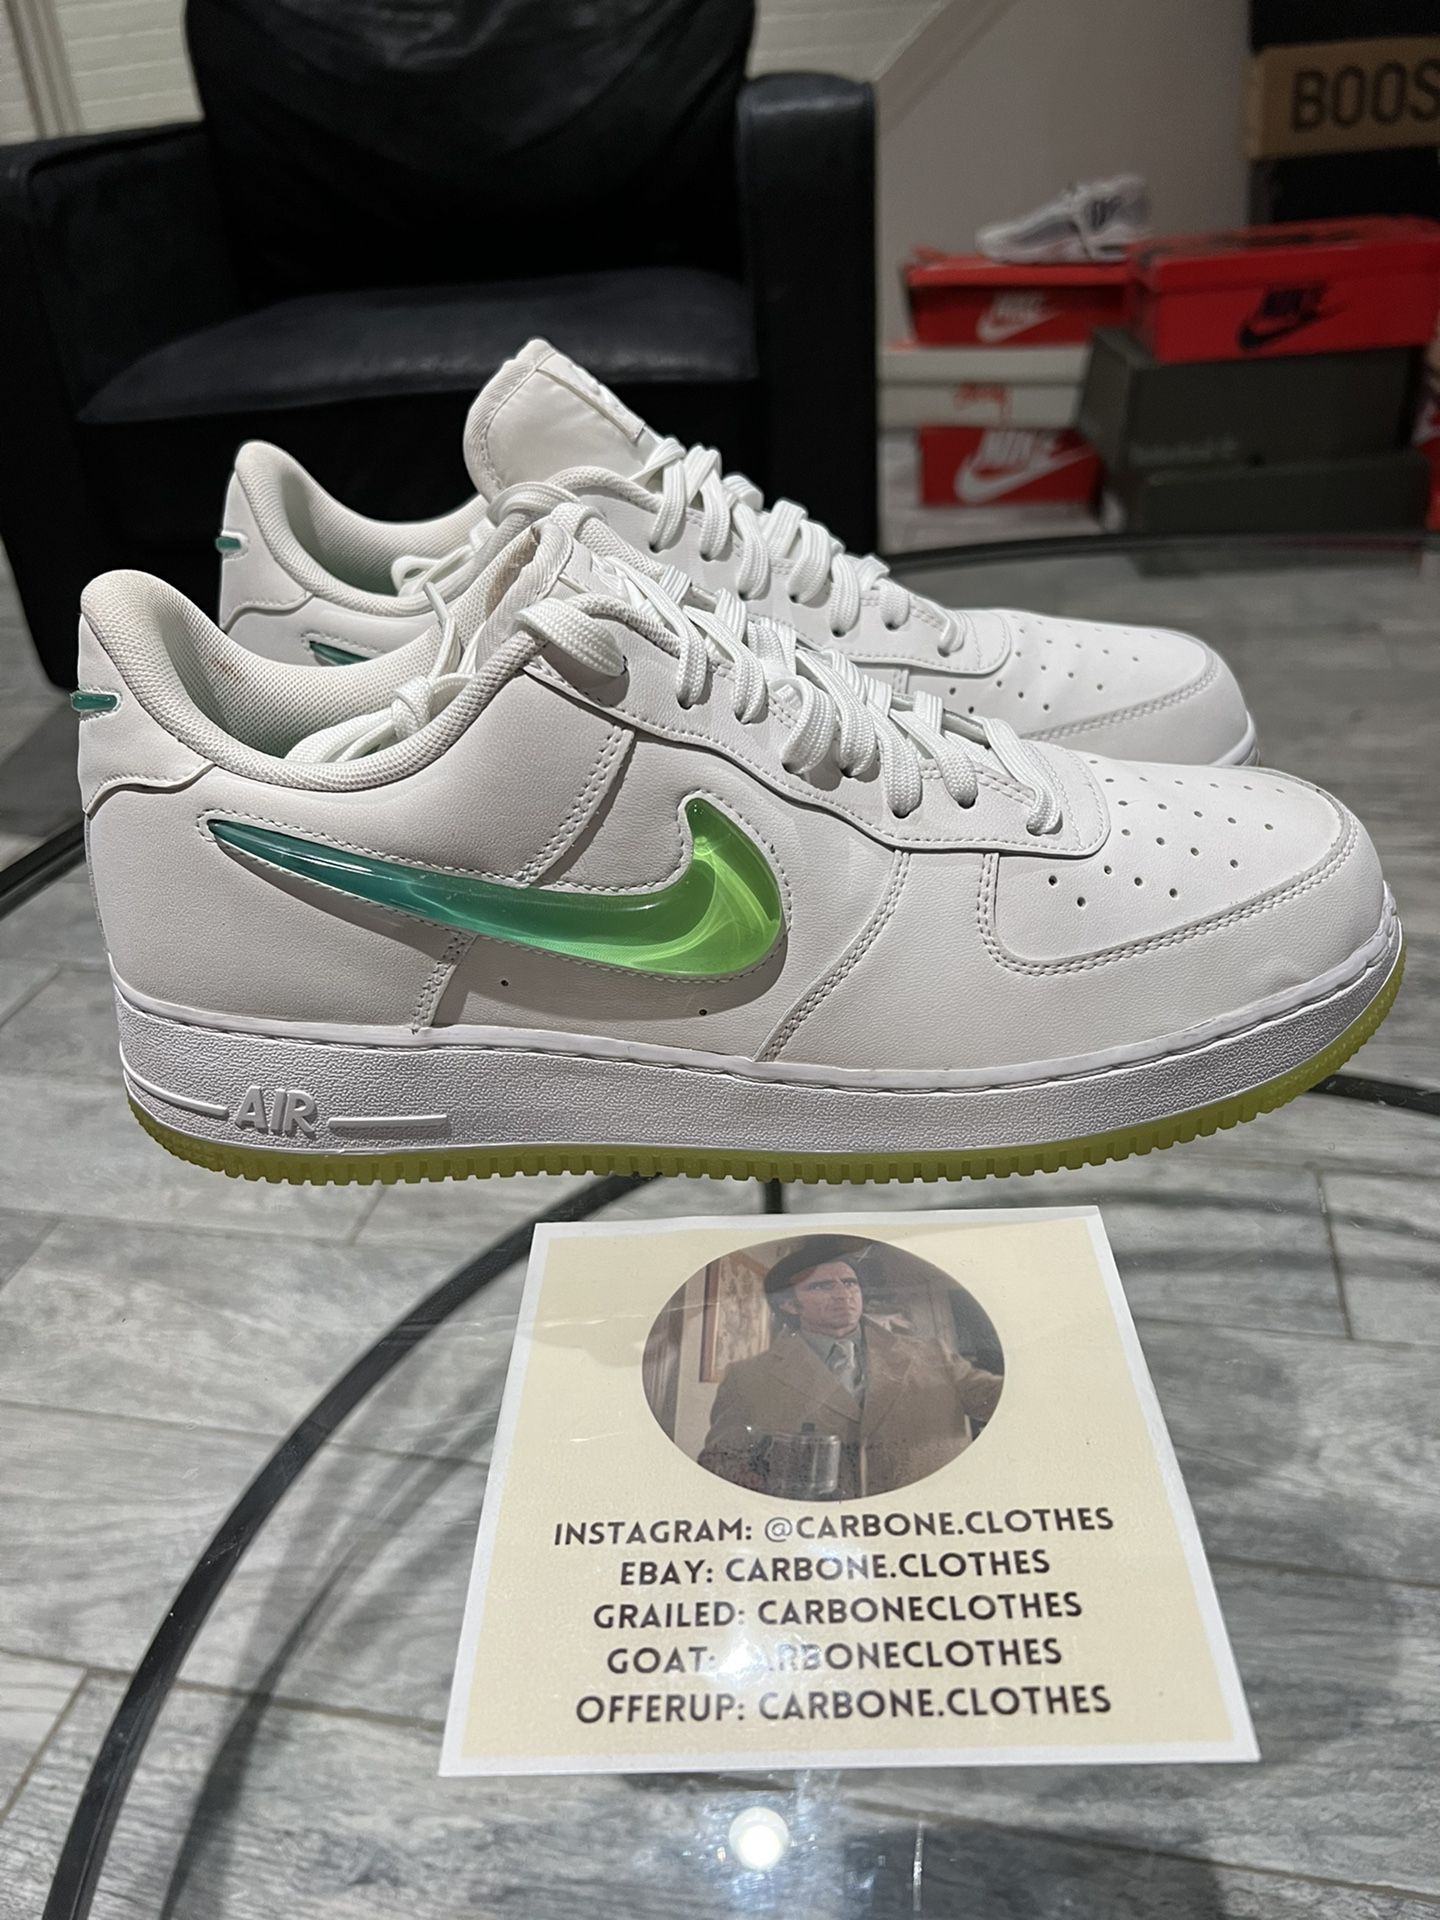 NIKE AIR FORCE ONE Size 12 for Sale in Brooklyn, NY OfferUp